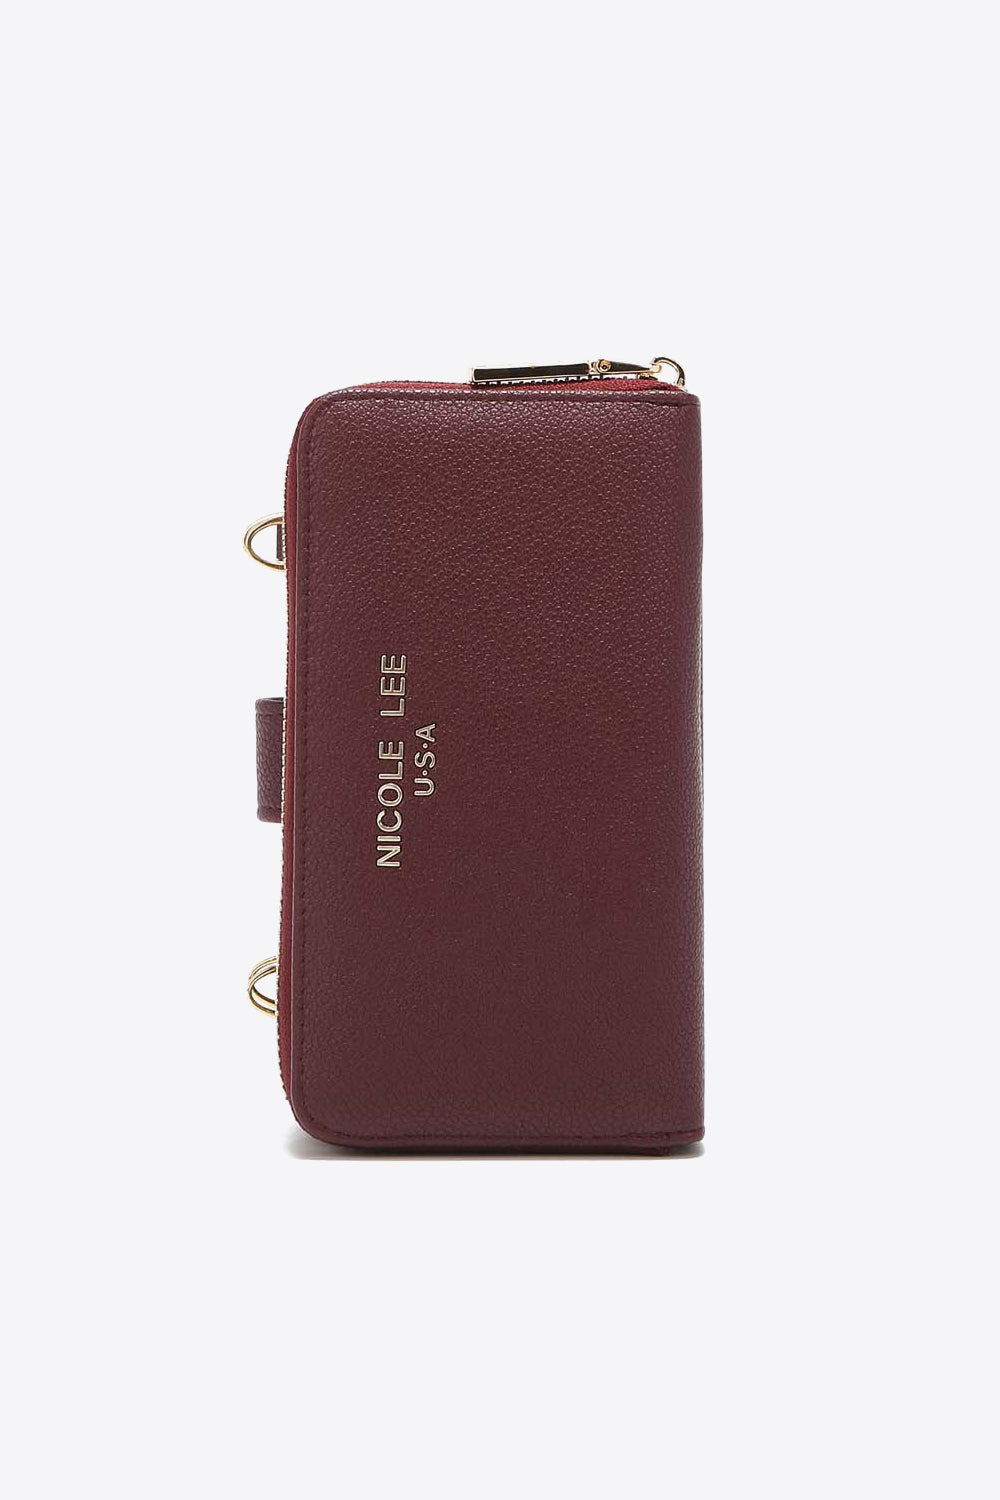 Nicole Lee USA Two-Piece Crossbody Phone Case Wallet - Brinxx Couture